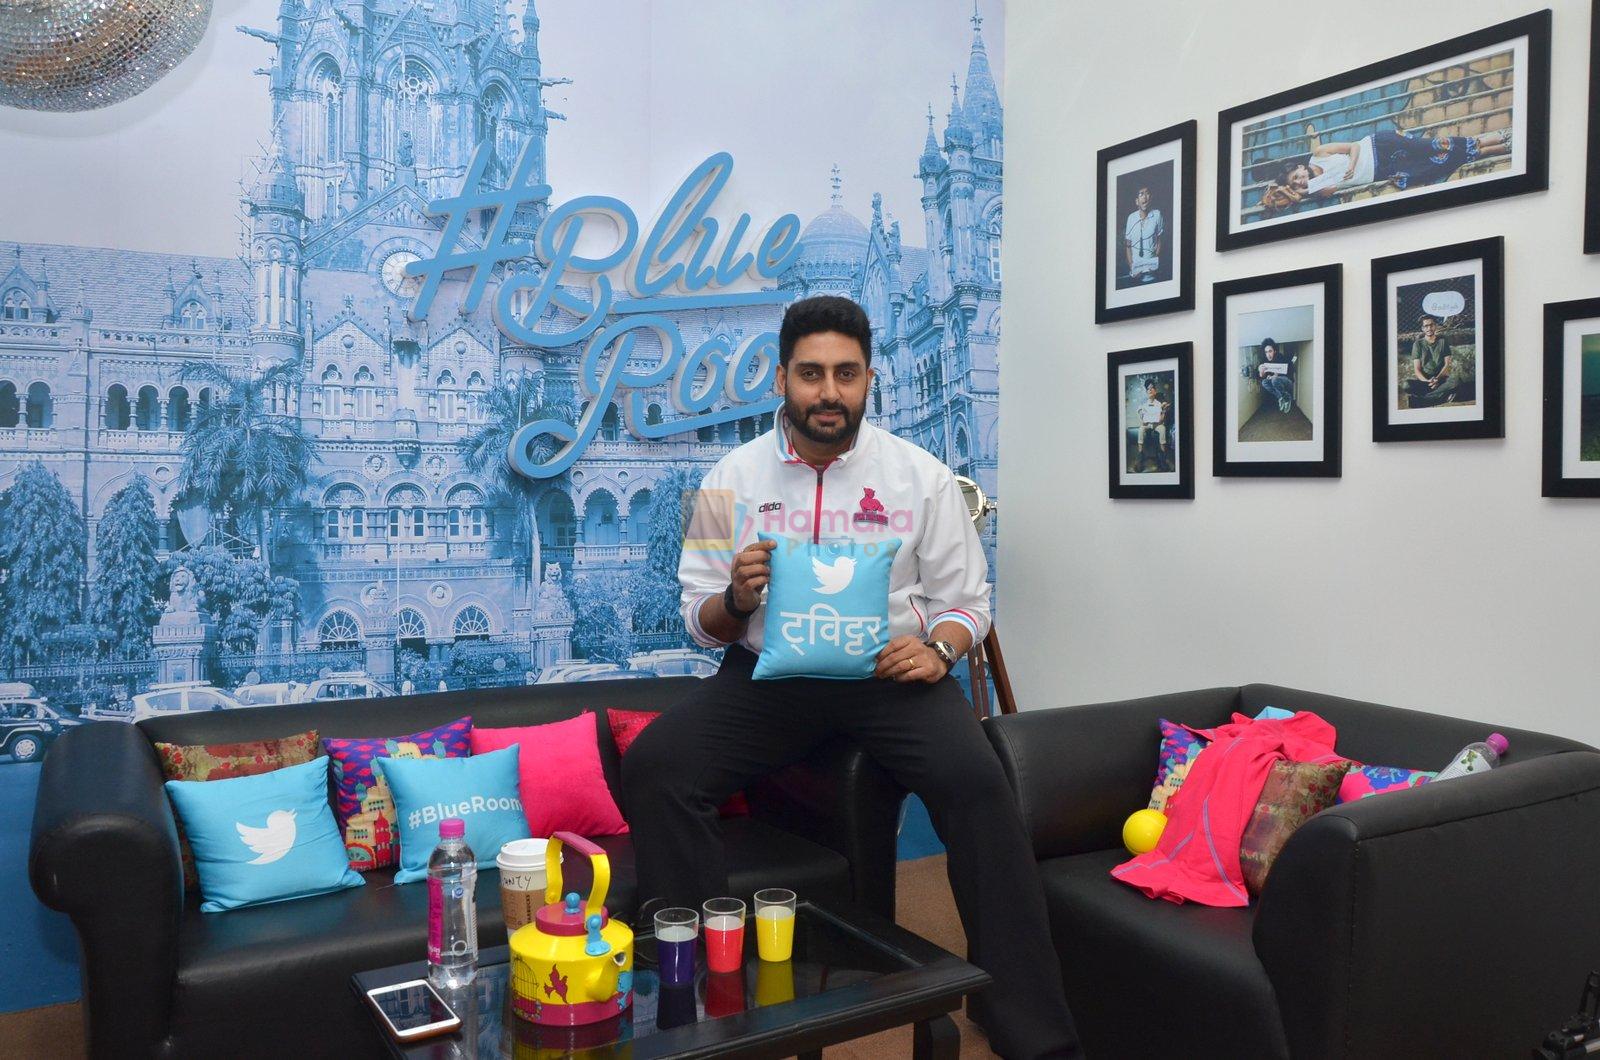 Abhishek Bachchan ties up with Twitter for Pro Kabaddi League on 5th June 2016